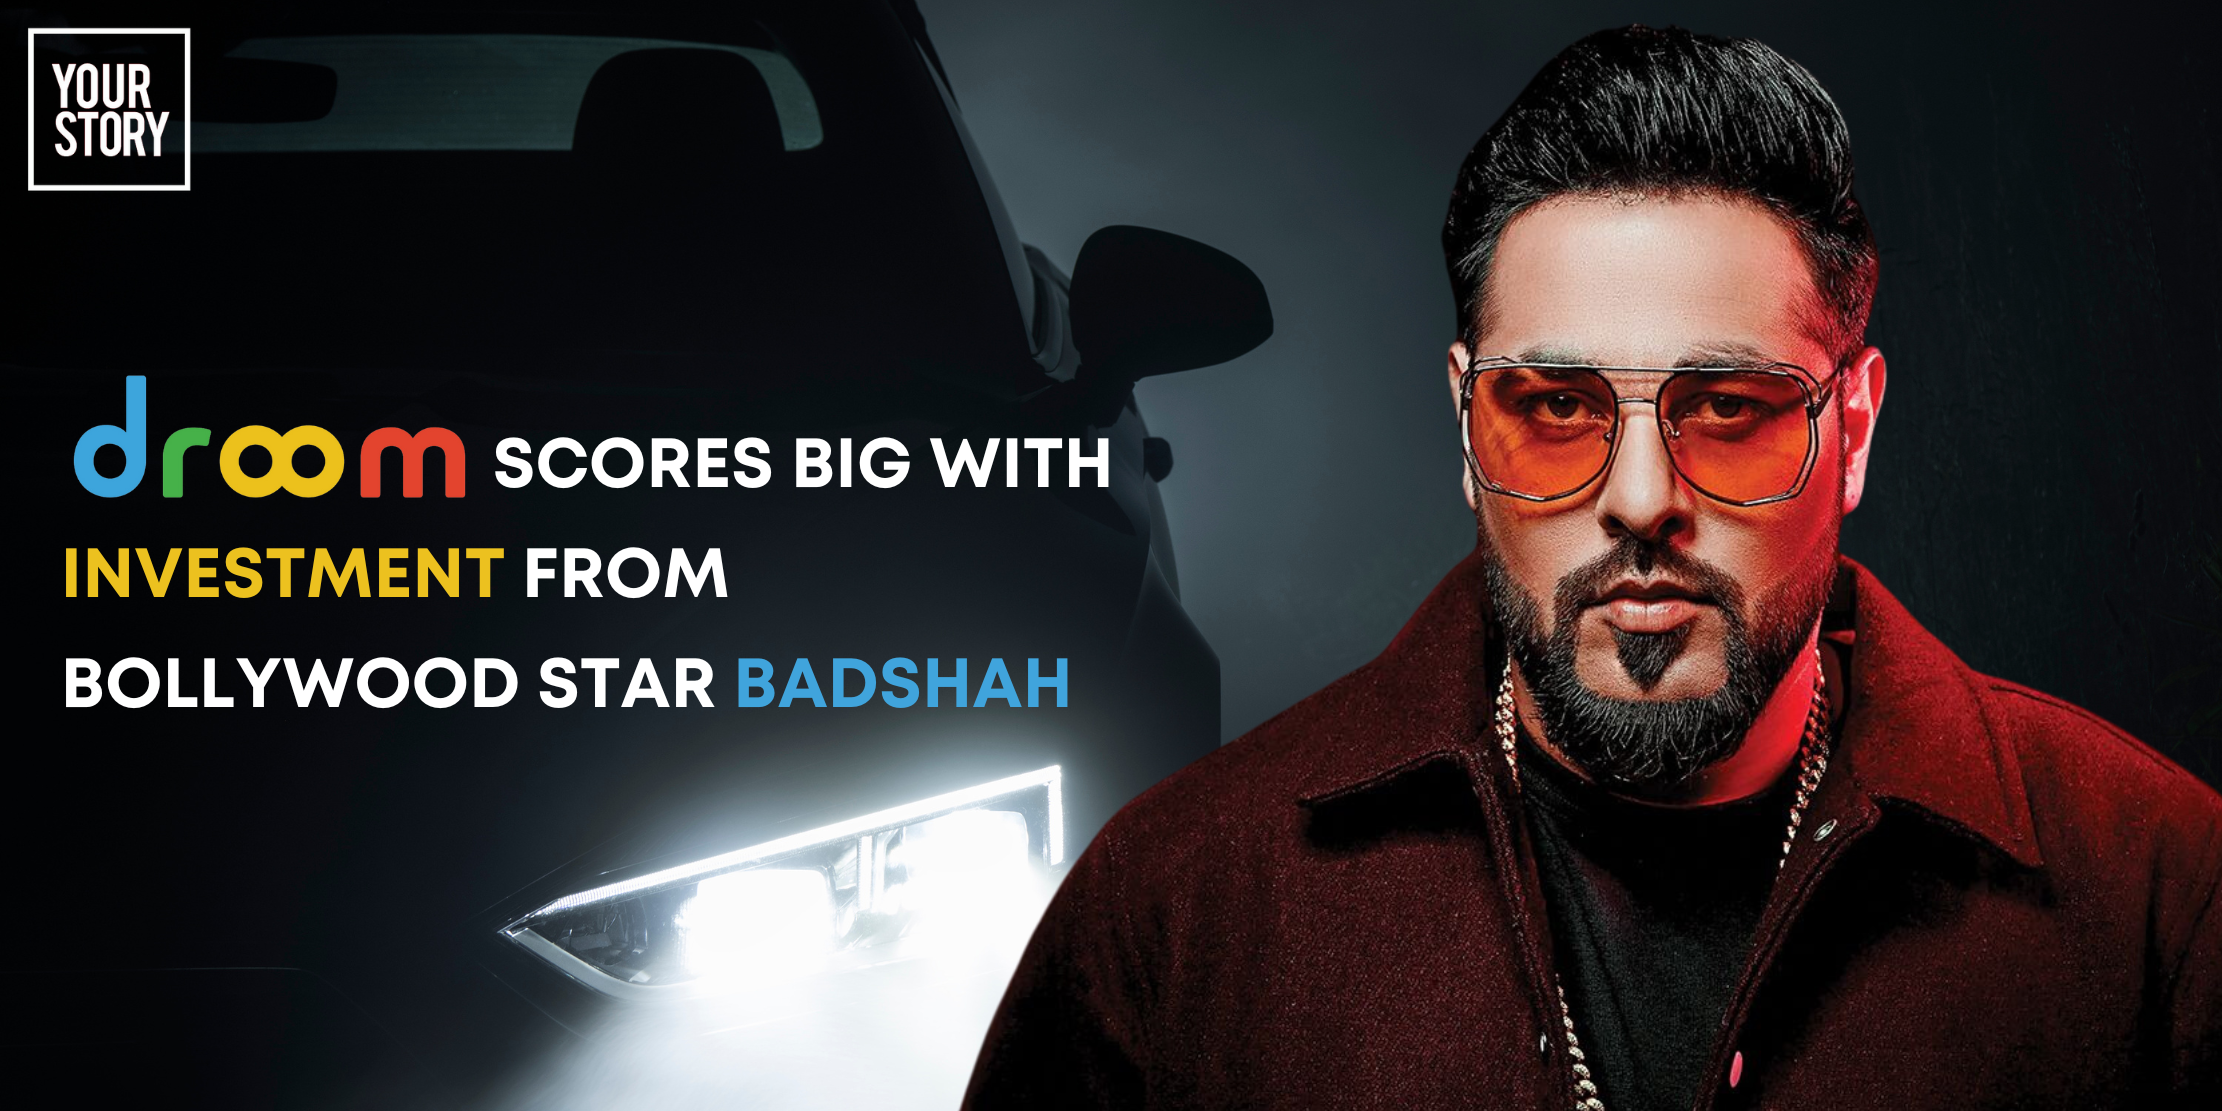 ⁠⁠Droom Scores Big with Investment from Bollywood Star Badshah